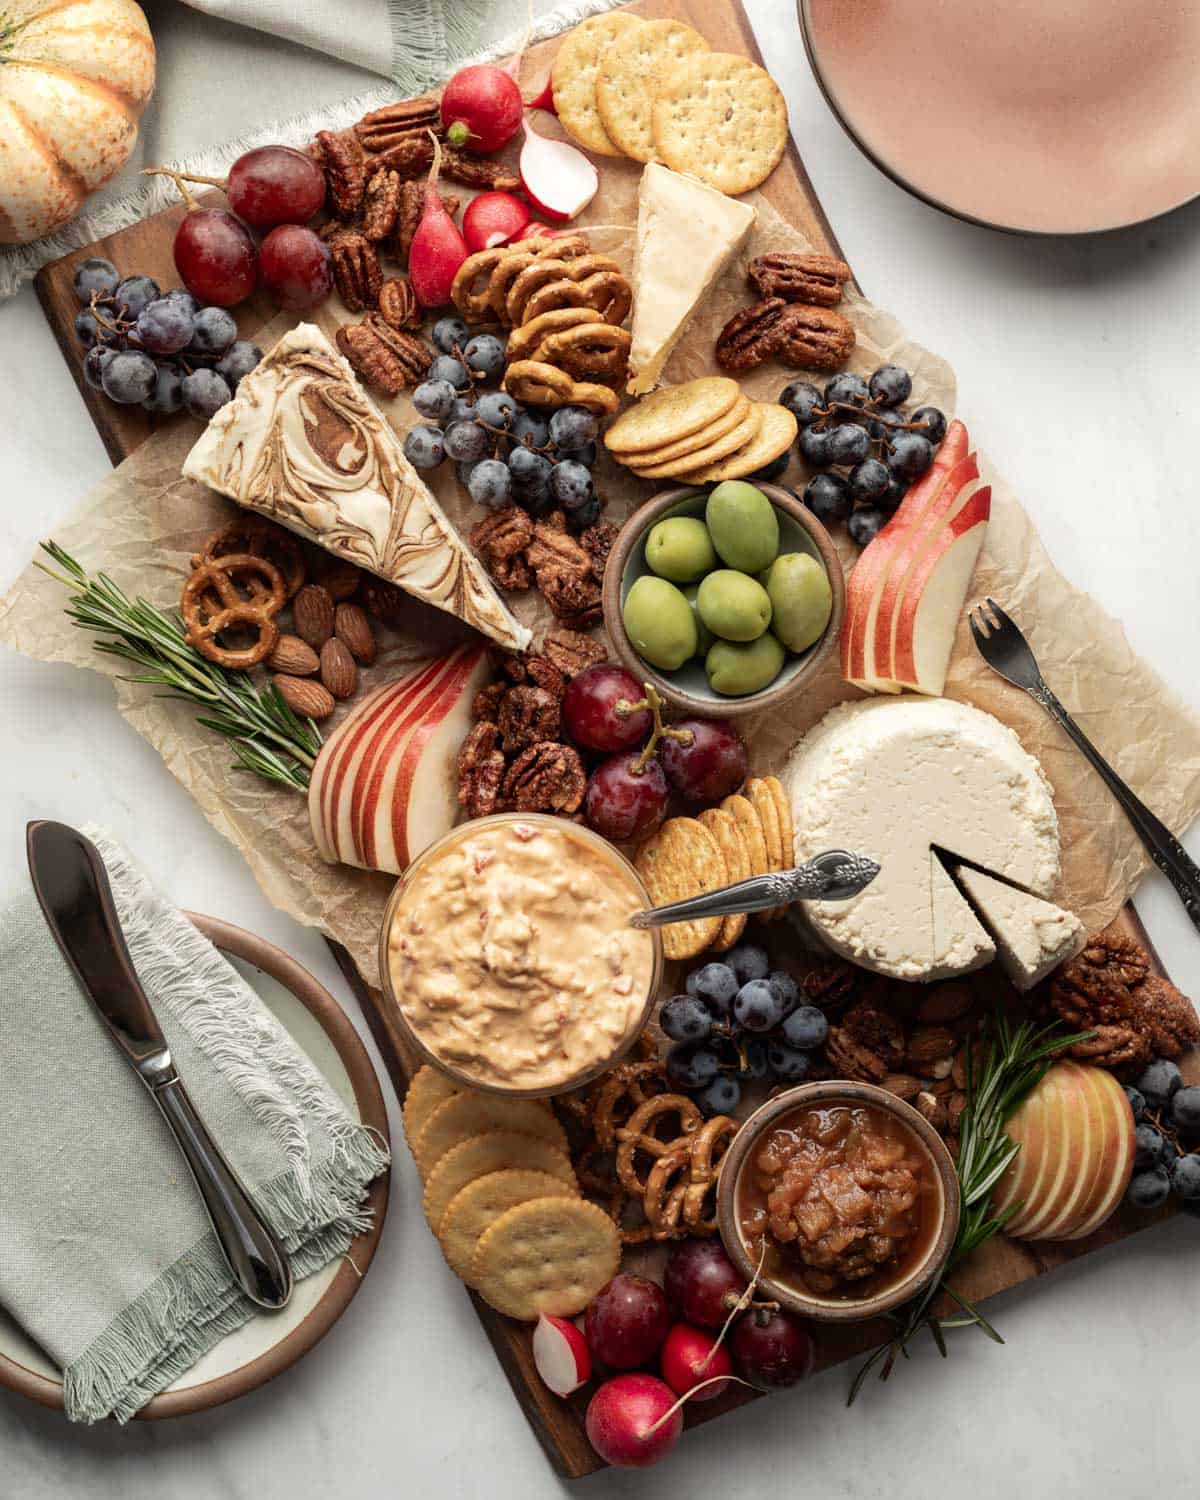 A Fall-inspired vegan cheese board with an assortment of dairy-free cheese, crackers, and snacks.